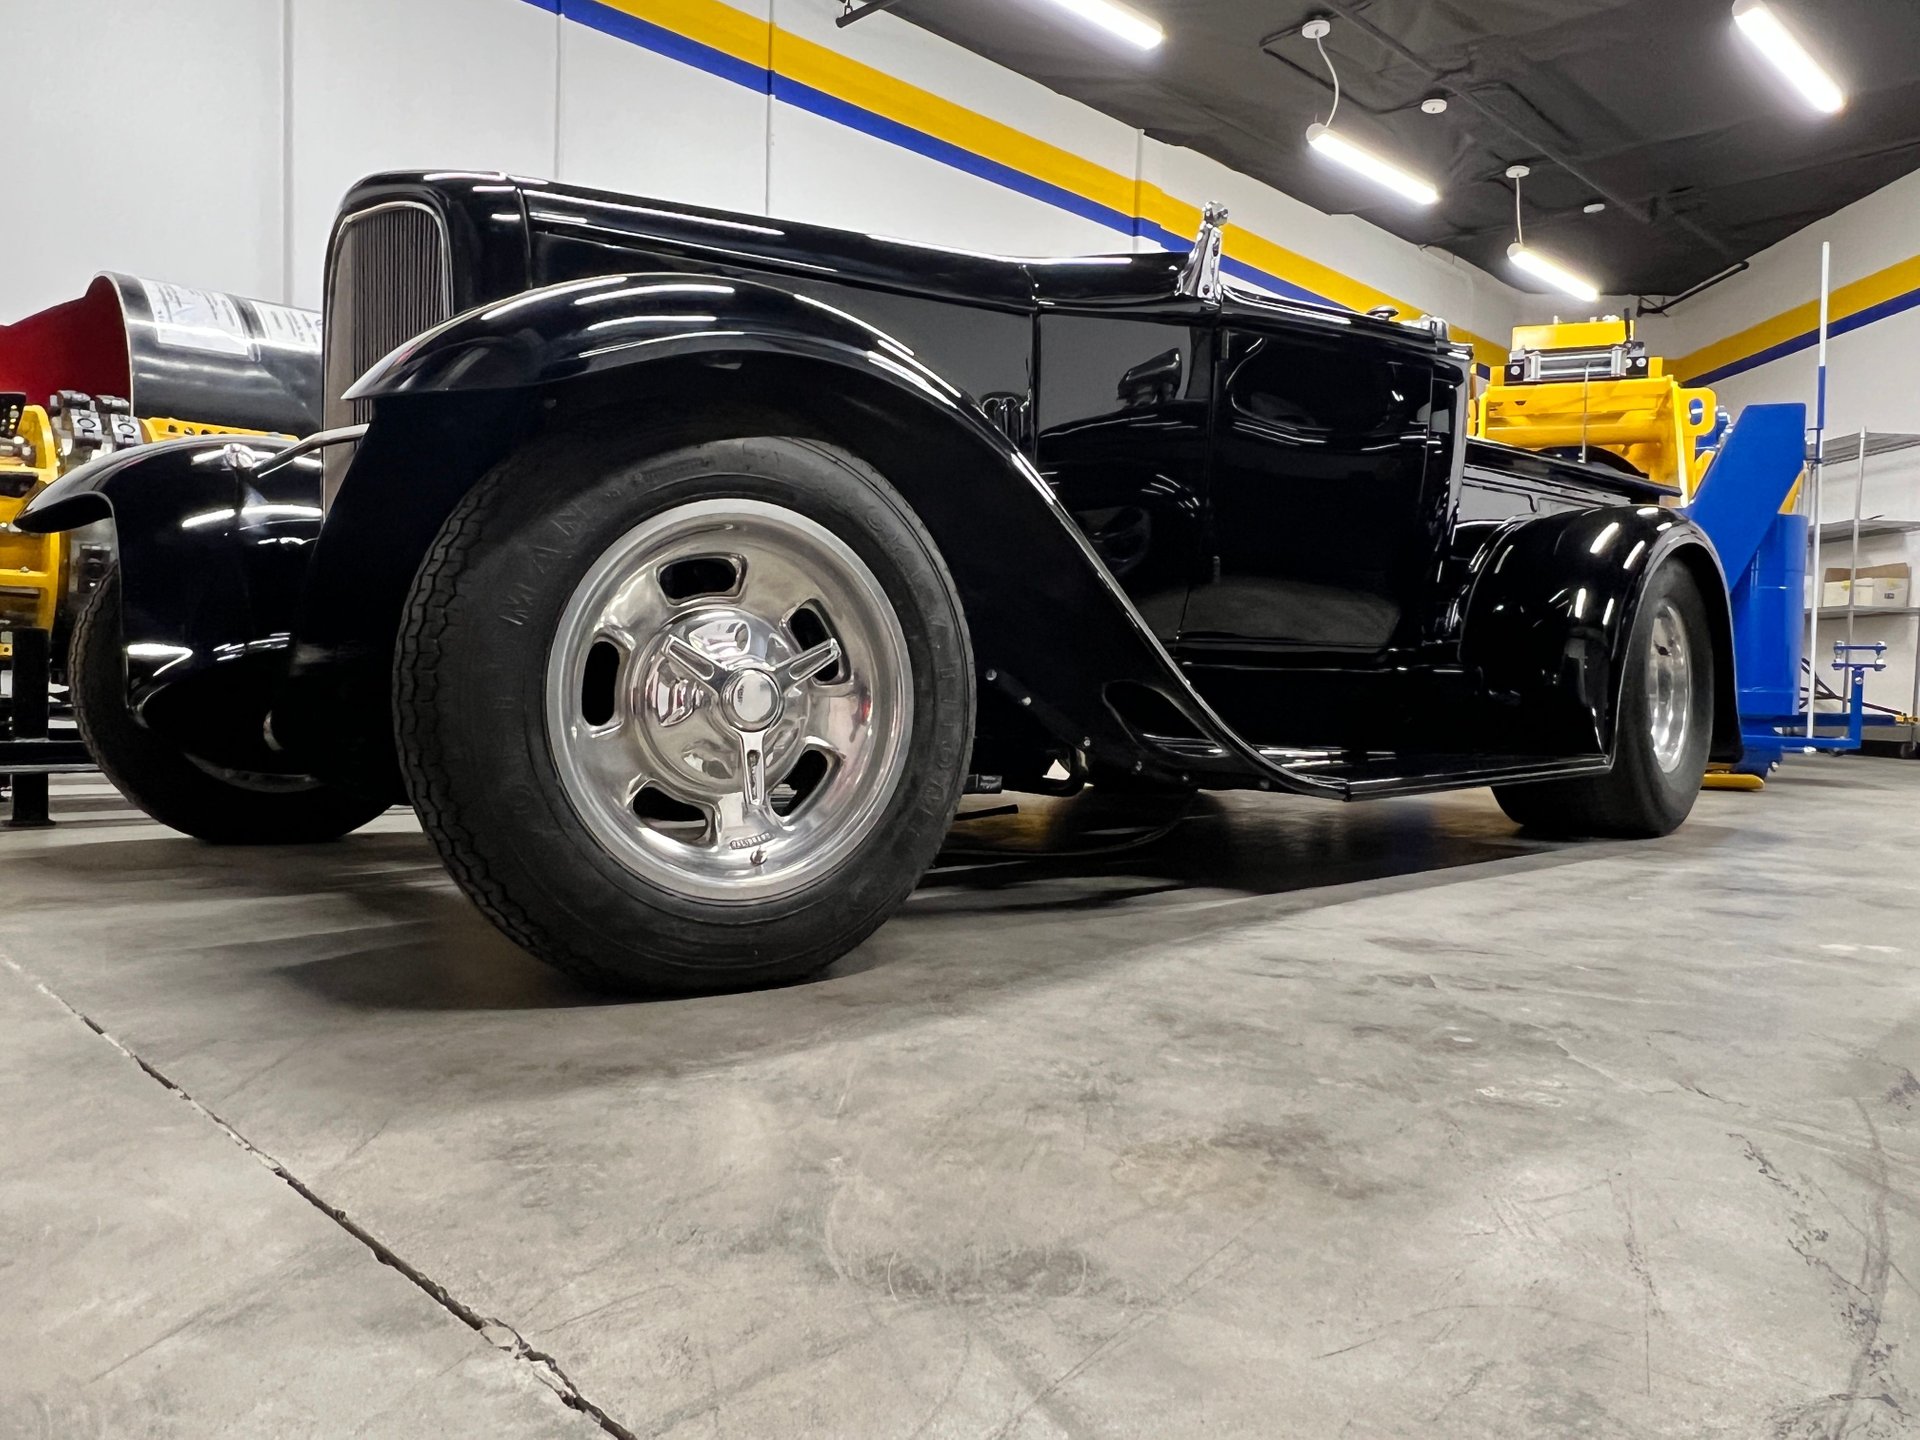 1931 ford roadster